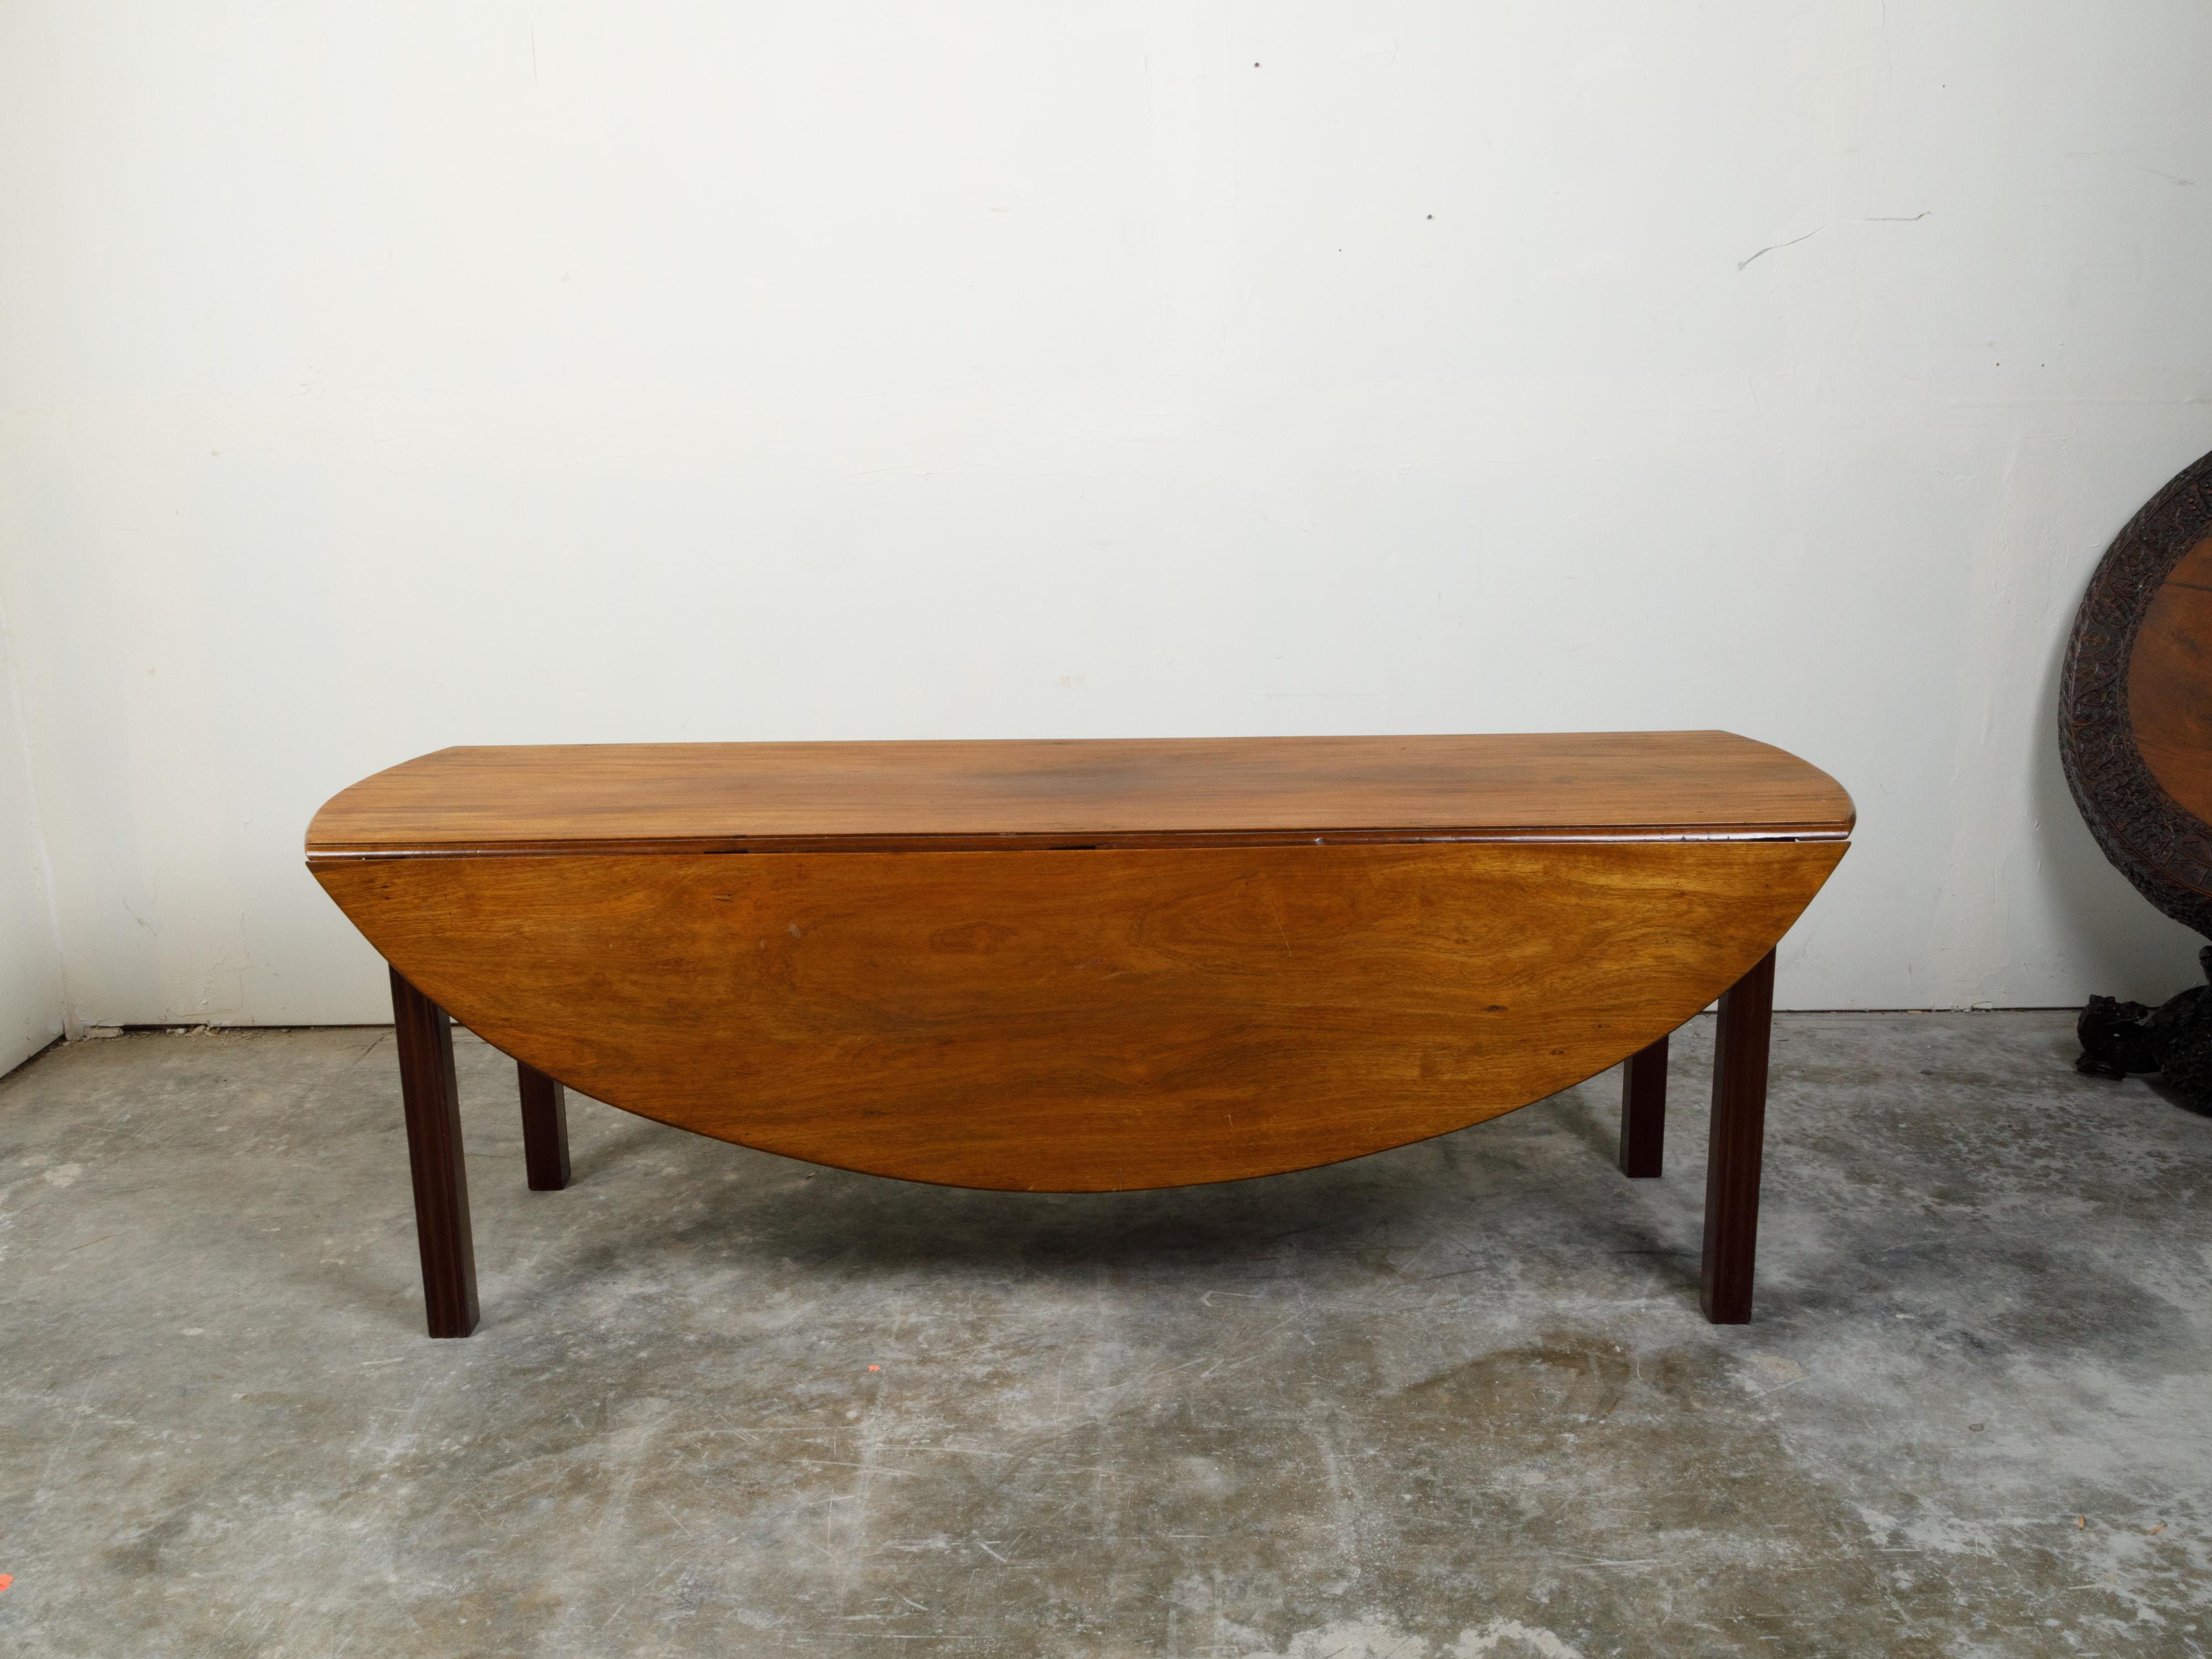 19th Century English Walnut Drop-Leaf Table with Oval Top and Straight Legs For Sale 7